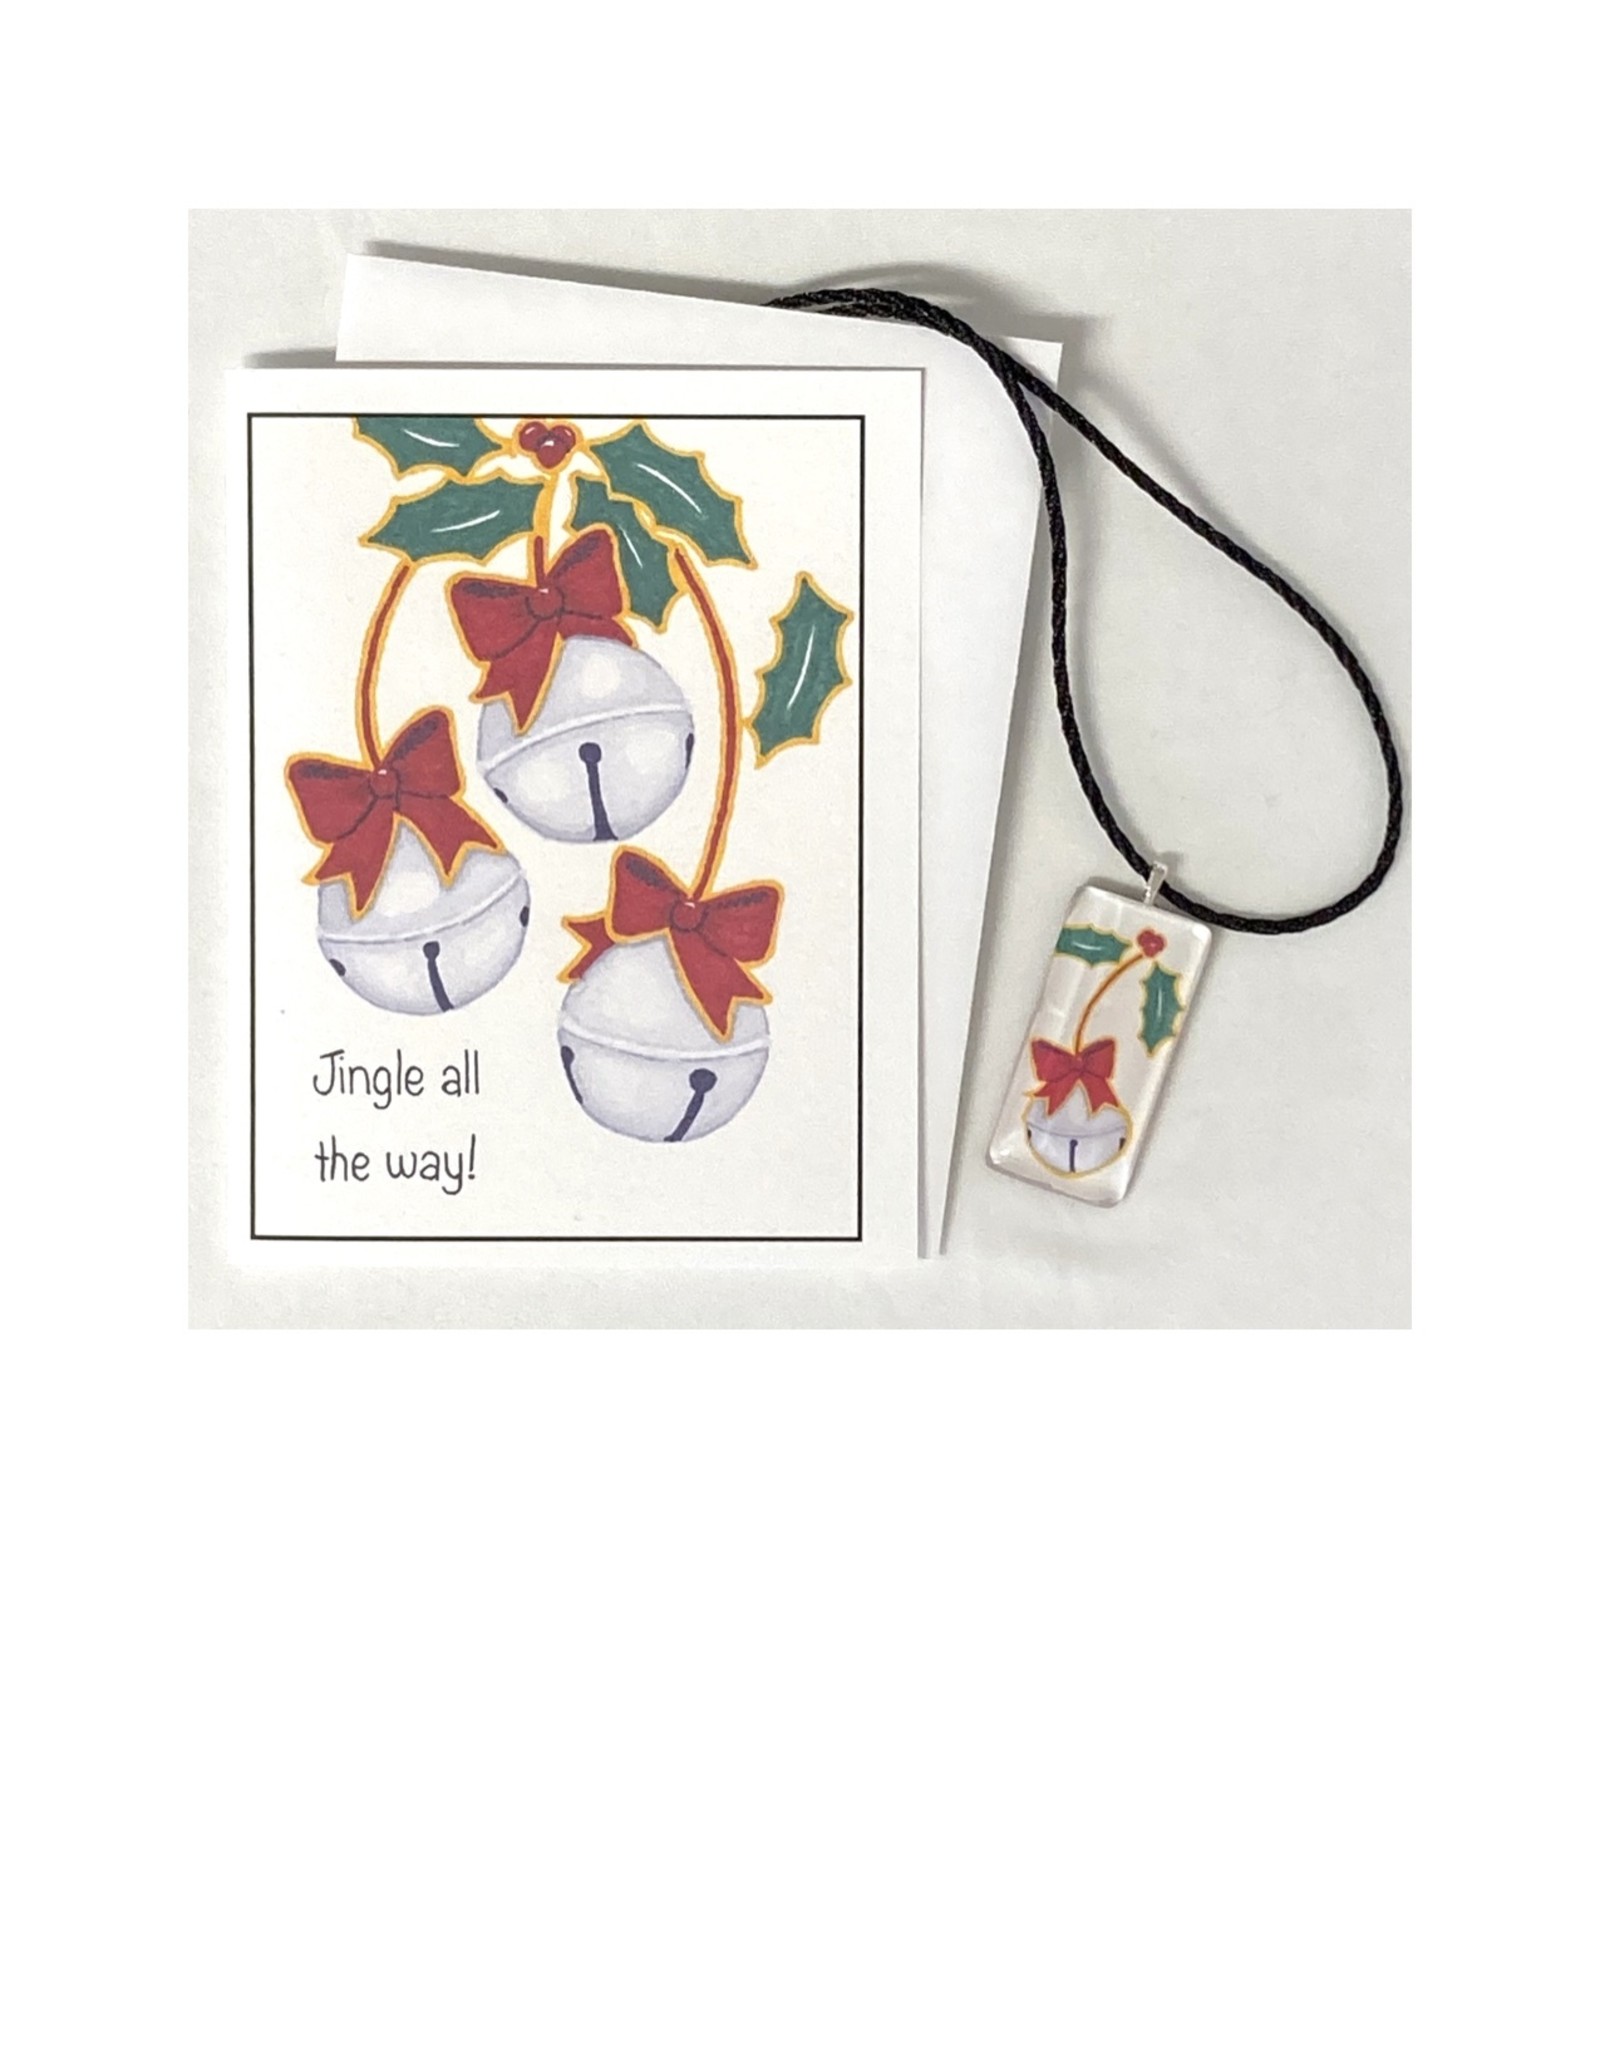 Kelly Casperson Jingle All The Way pendant and card set